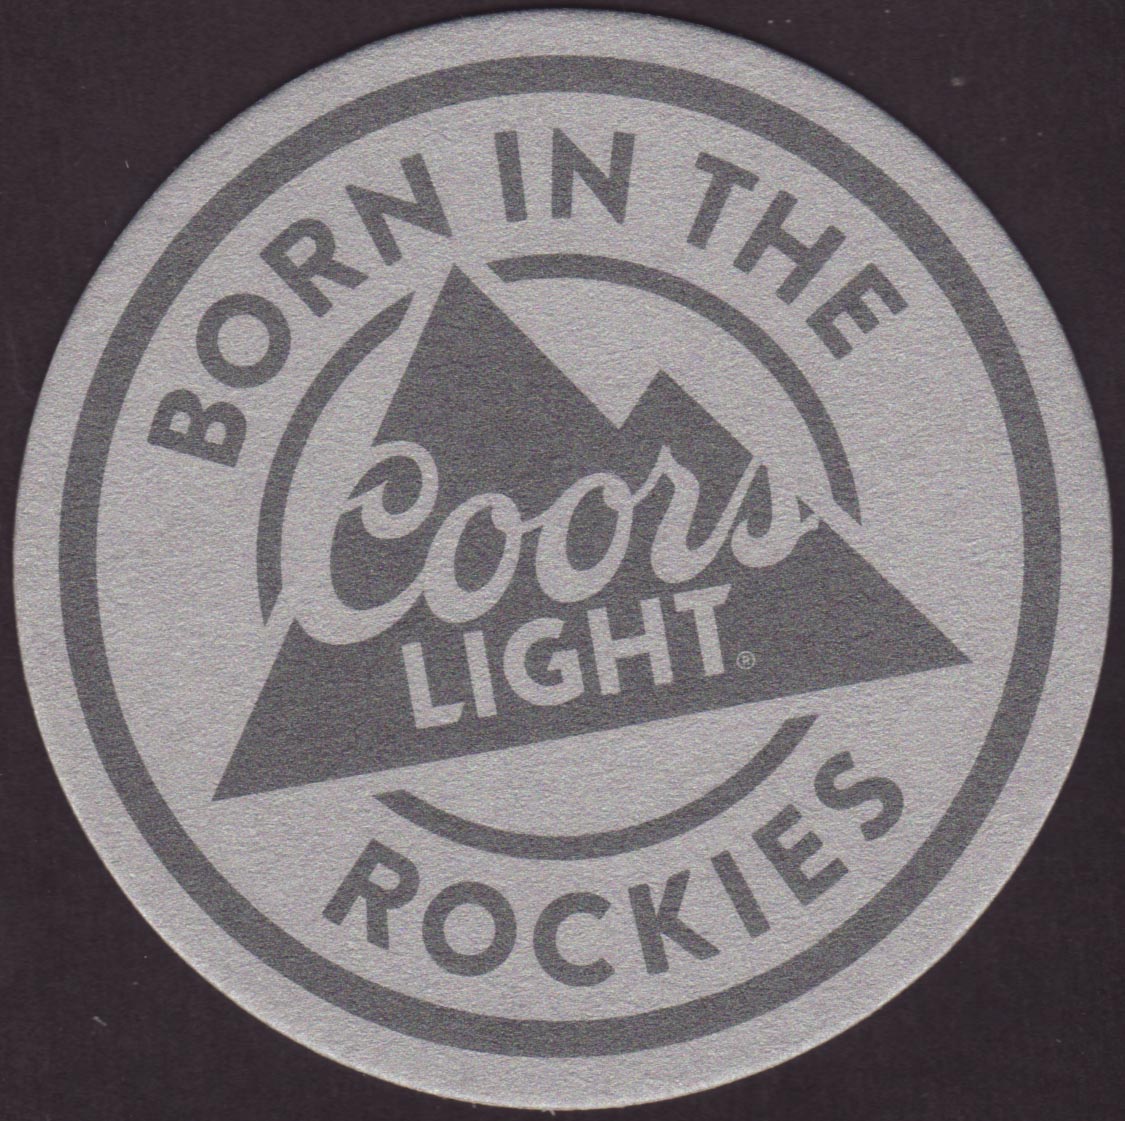 A Taste Born in the Rocky Mountains ~GOLDEN,CO 2004 2 BEER COASTER~COORS LIGHT 